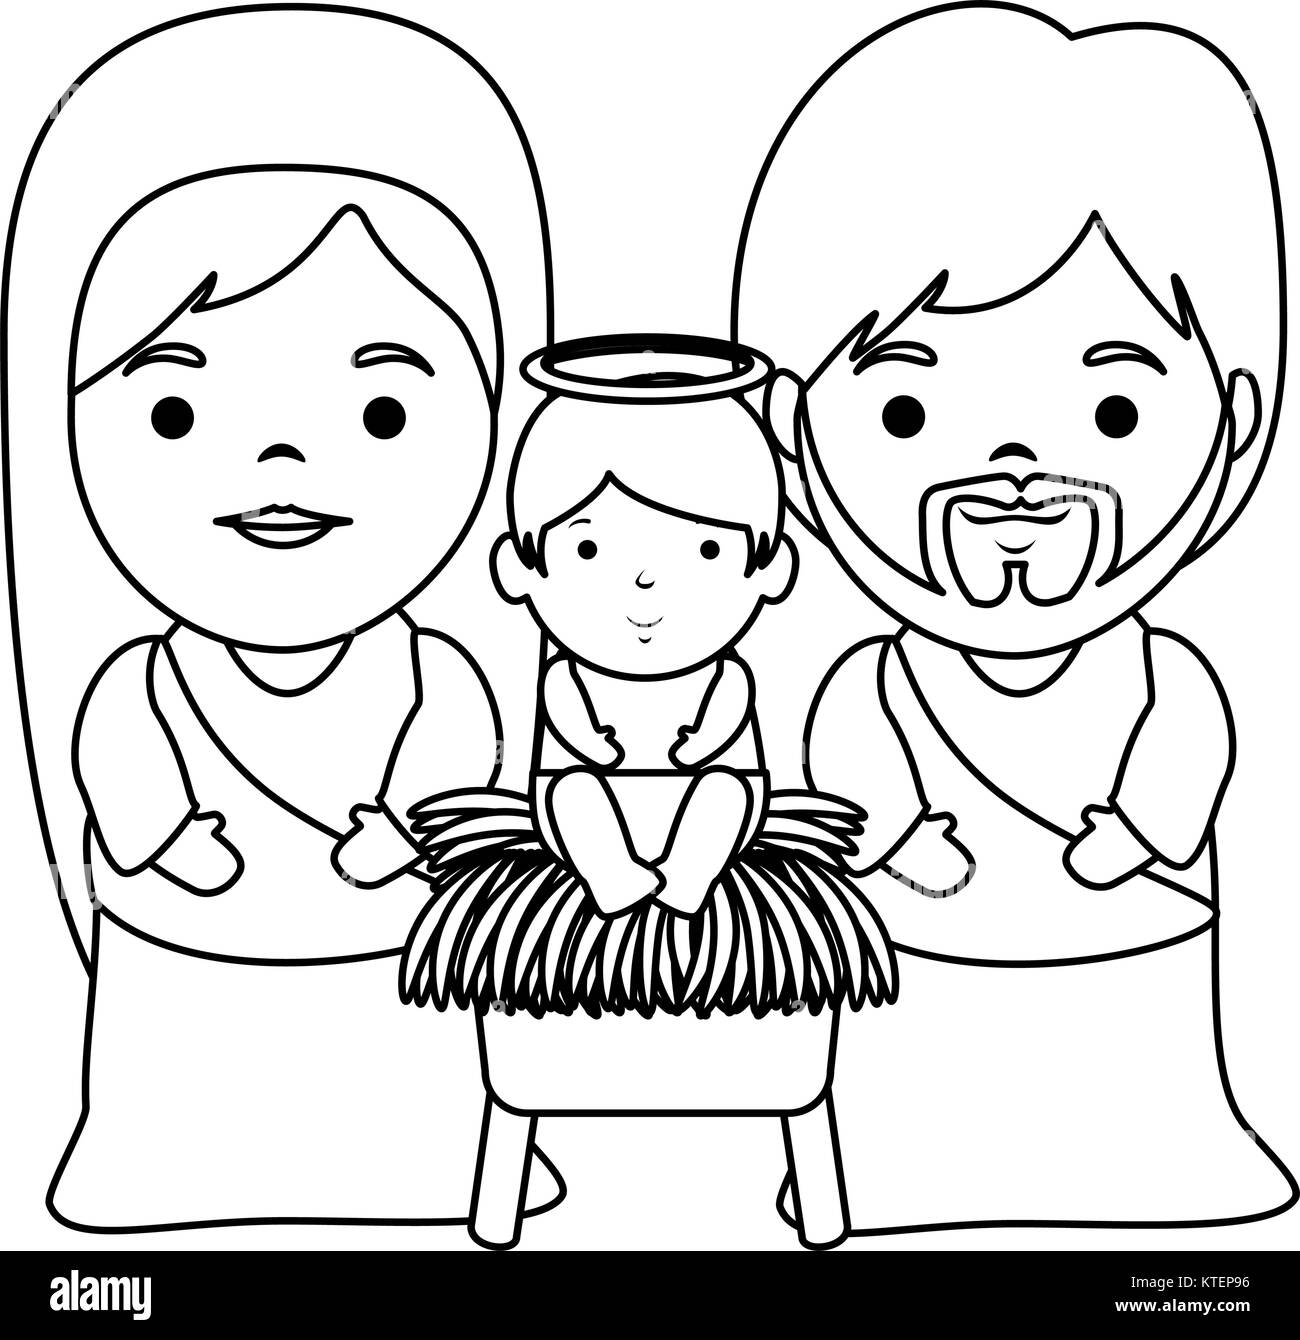 holy-family-christmas-characters-vector-illustration-design-stock